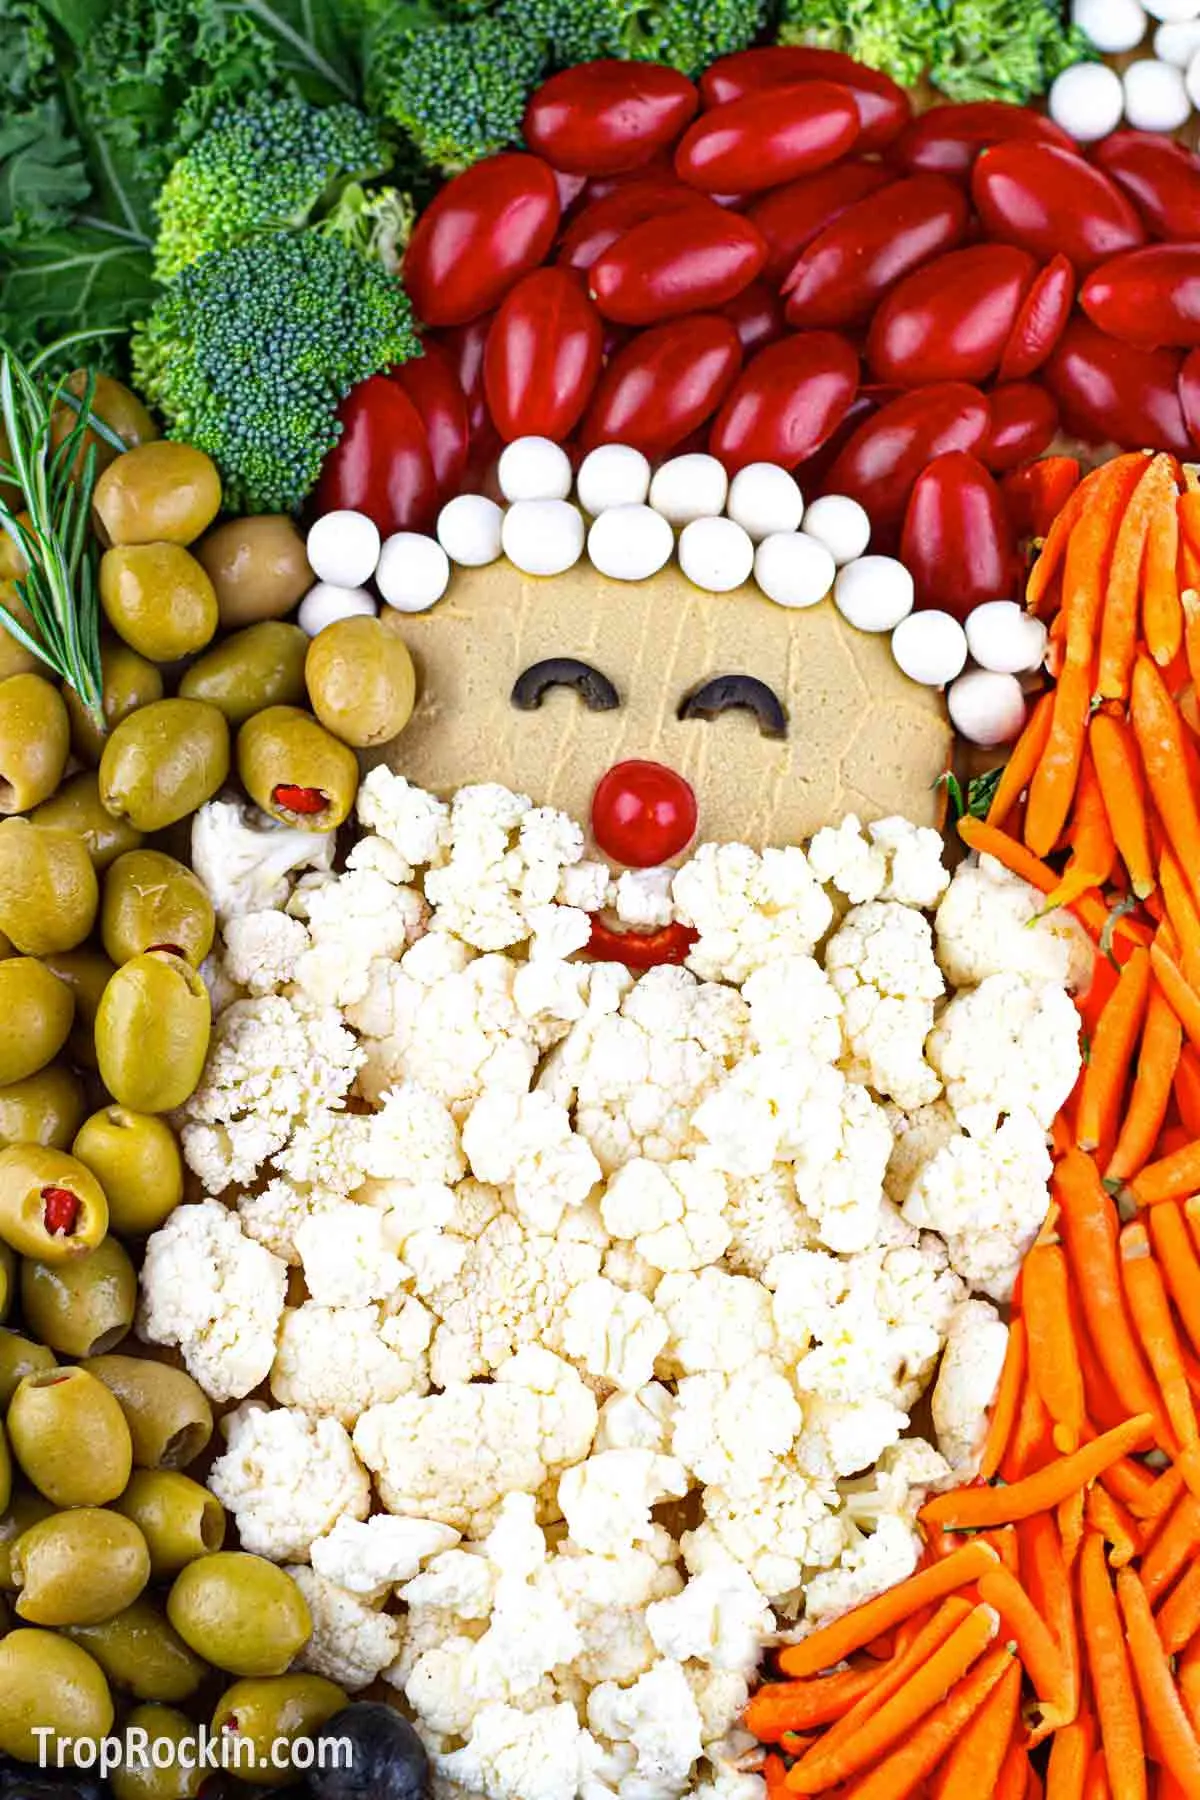 santa veggie tray in the shape of a snta claus face.